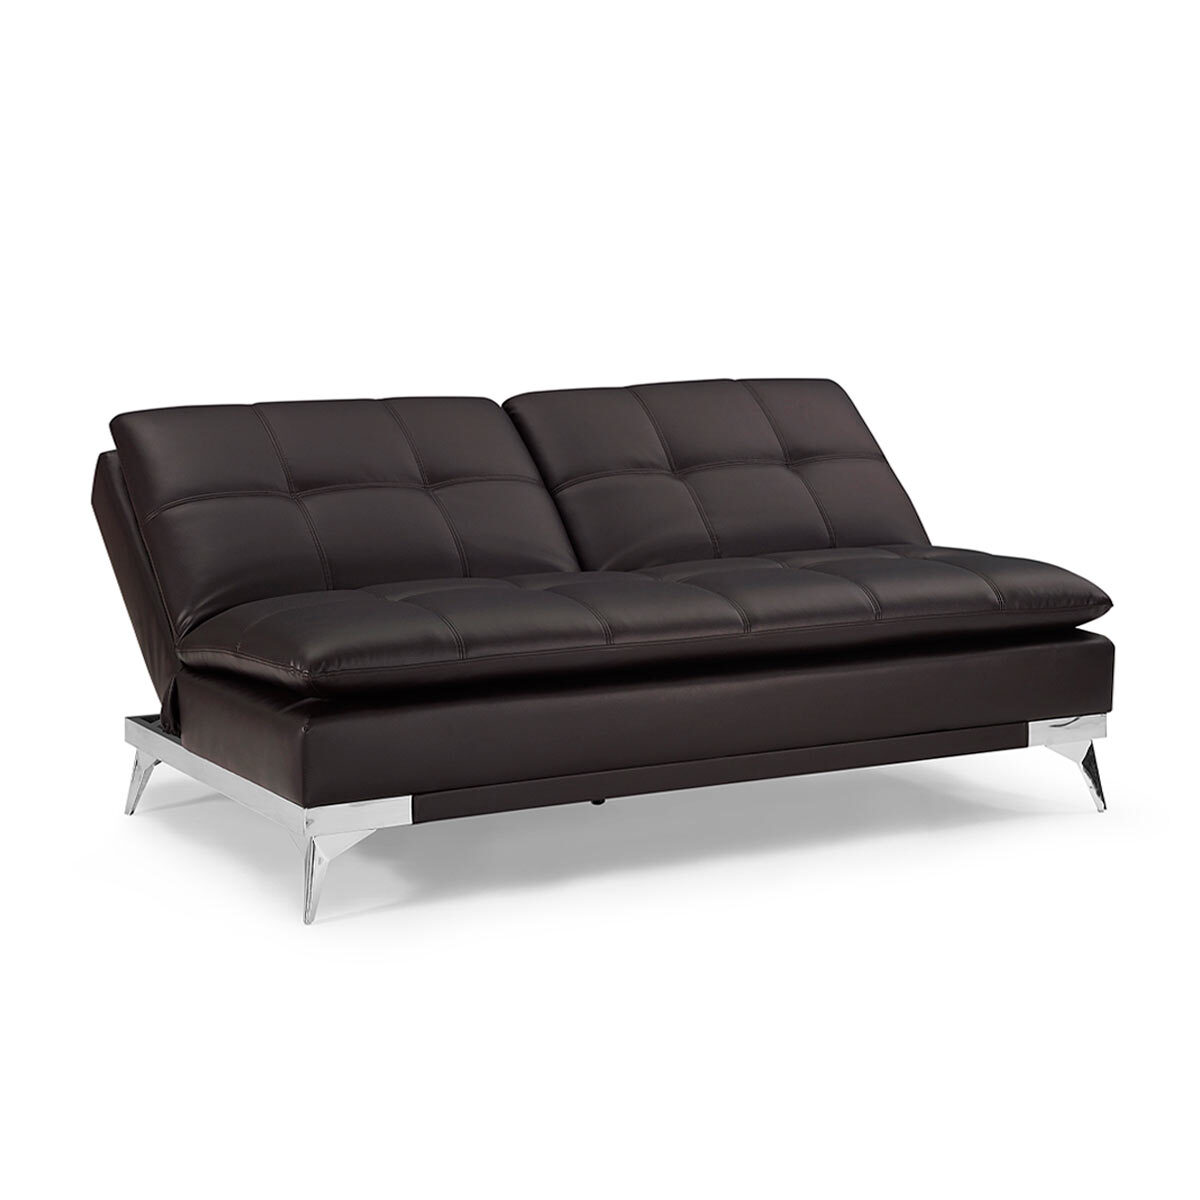 Image of Domus Eurolounger, Reclined